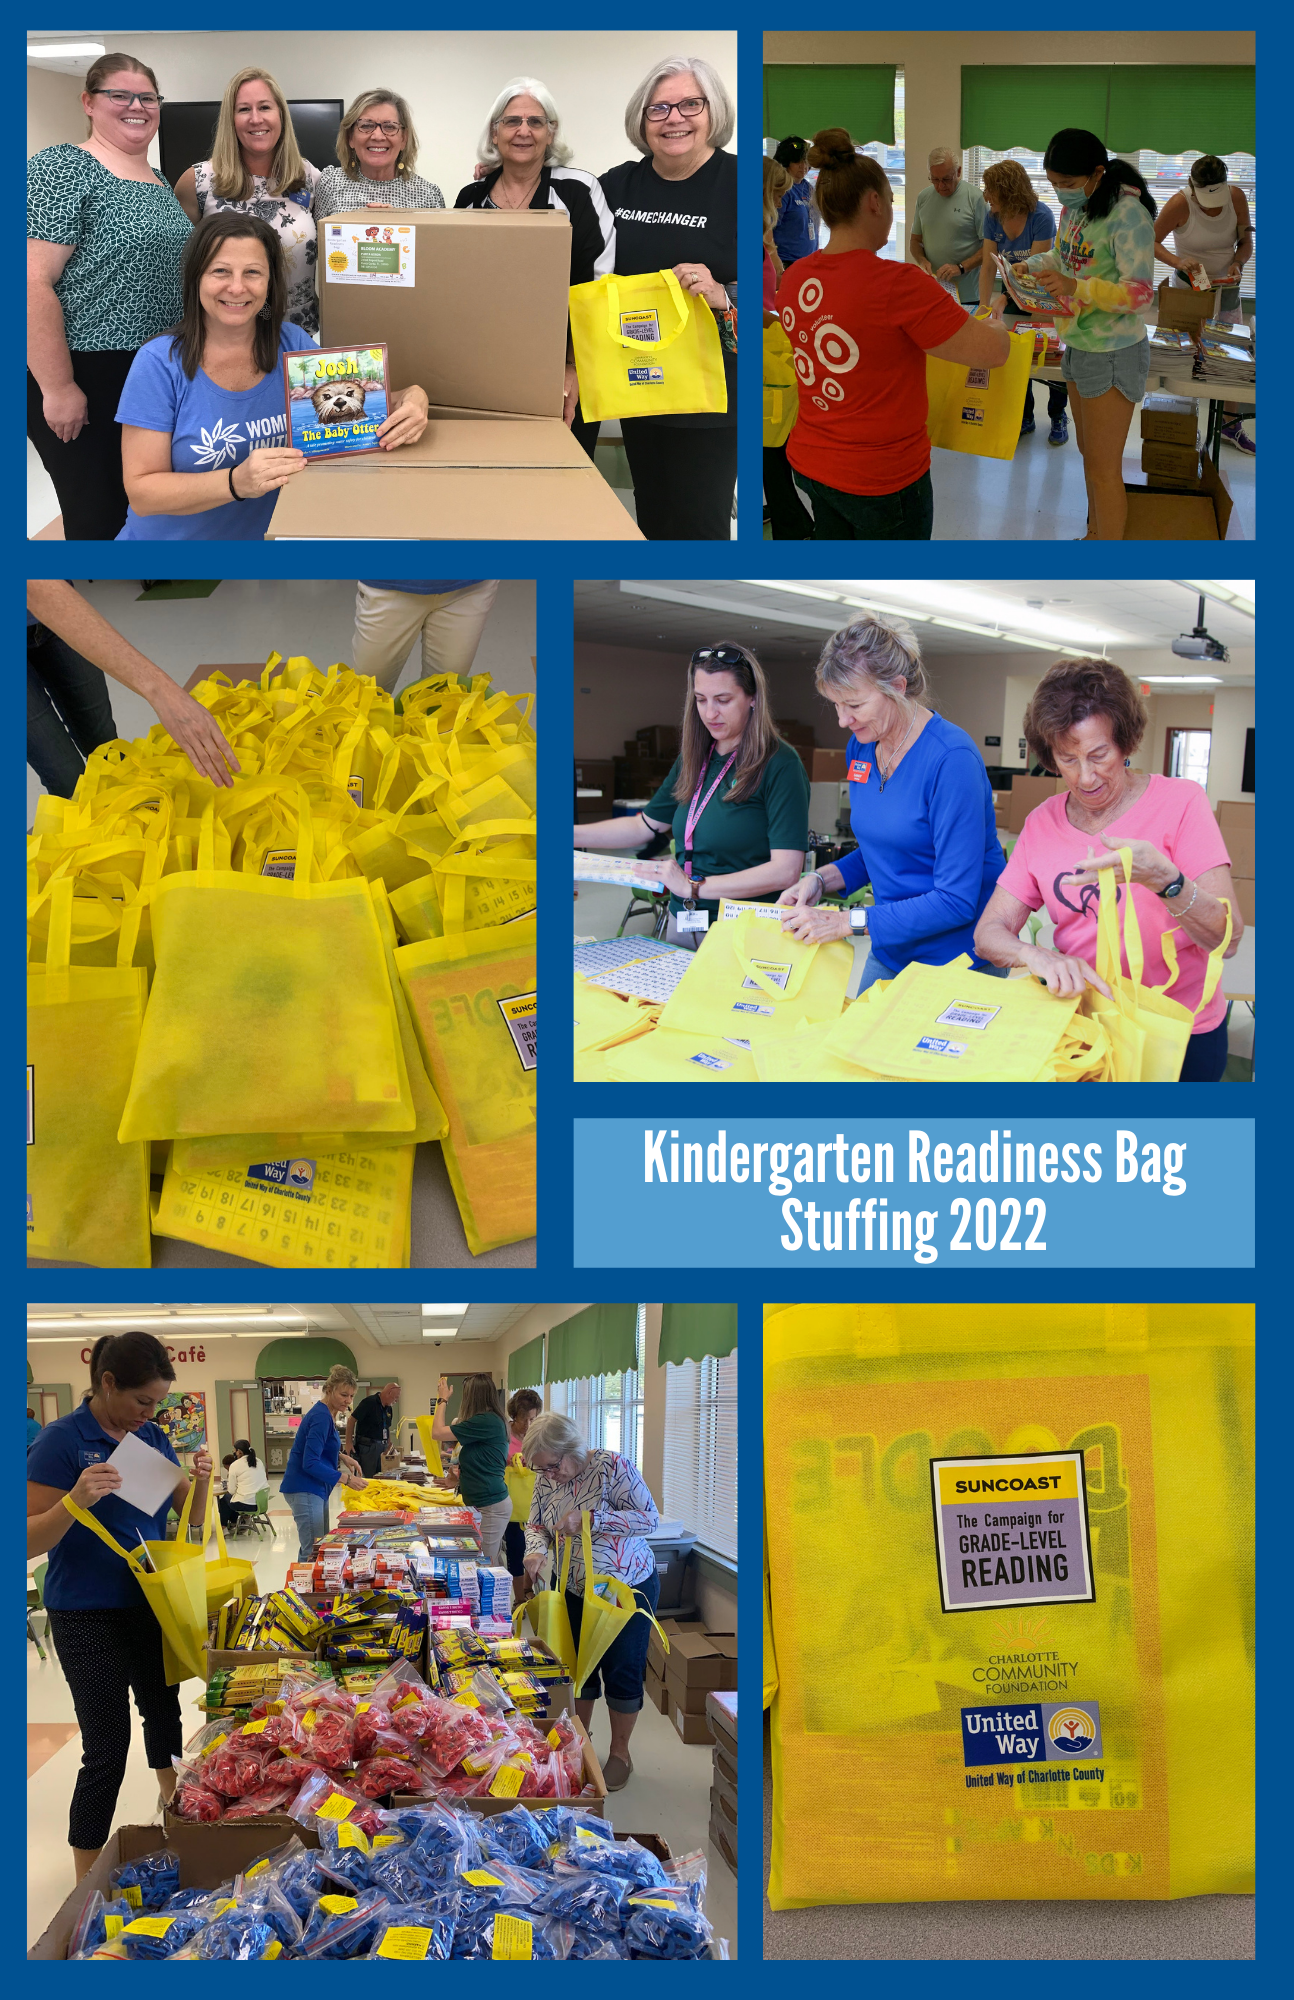 photo collage from Kindergarten Readiness Bag event